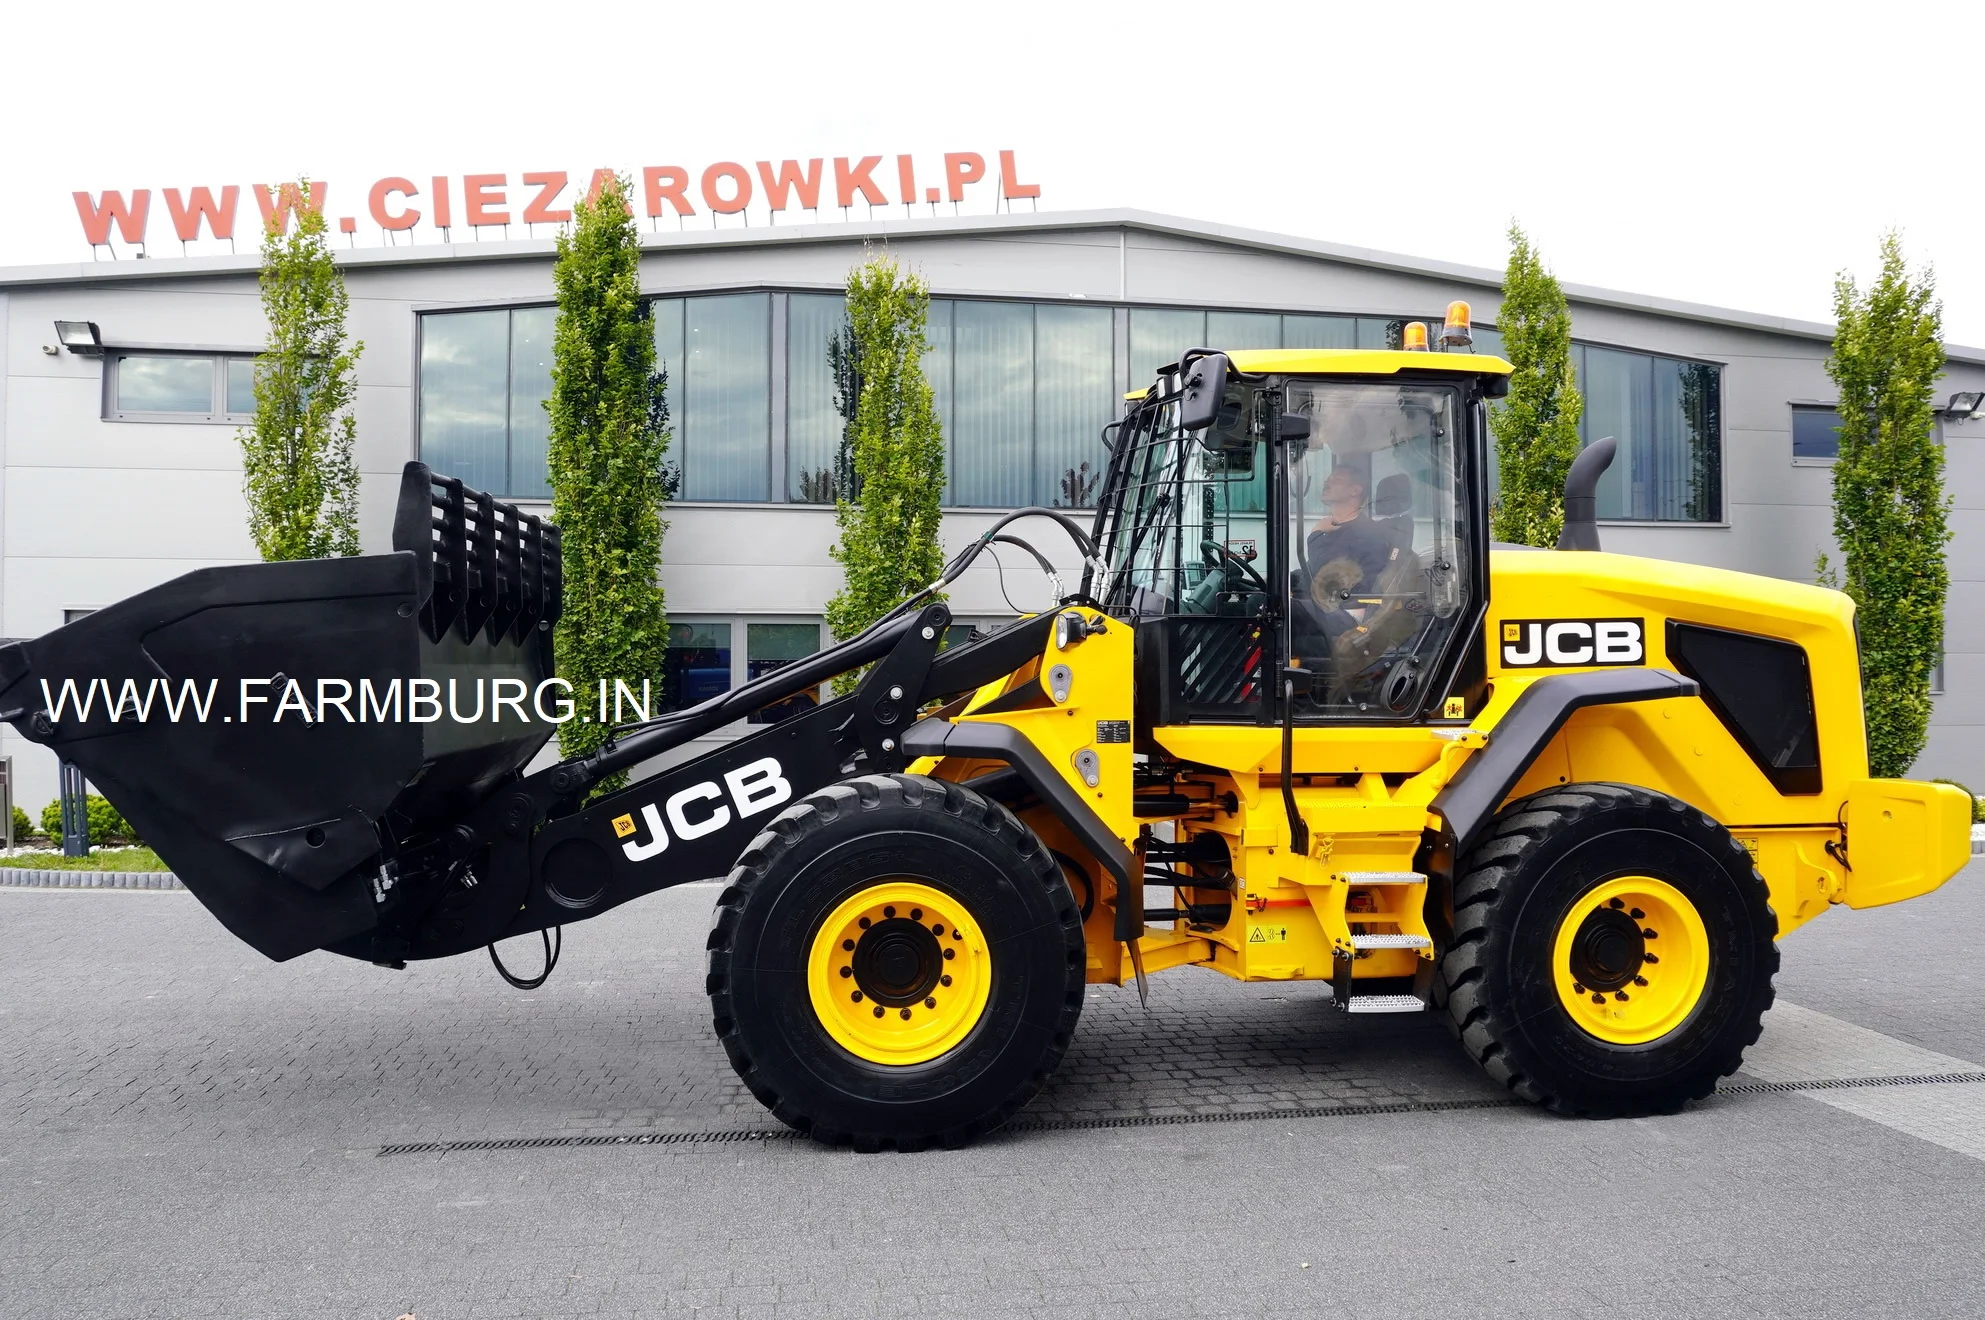 Hot sale cheap price JCB 437 HT backhoe loader foton lovol earth-moving machinery construction machineries for sale